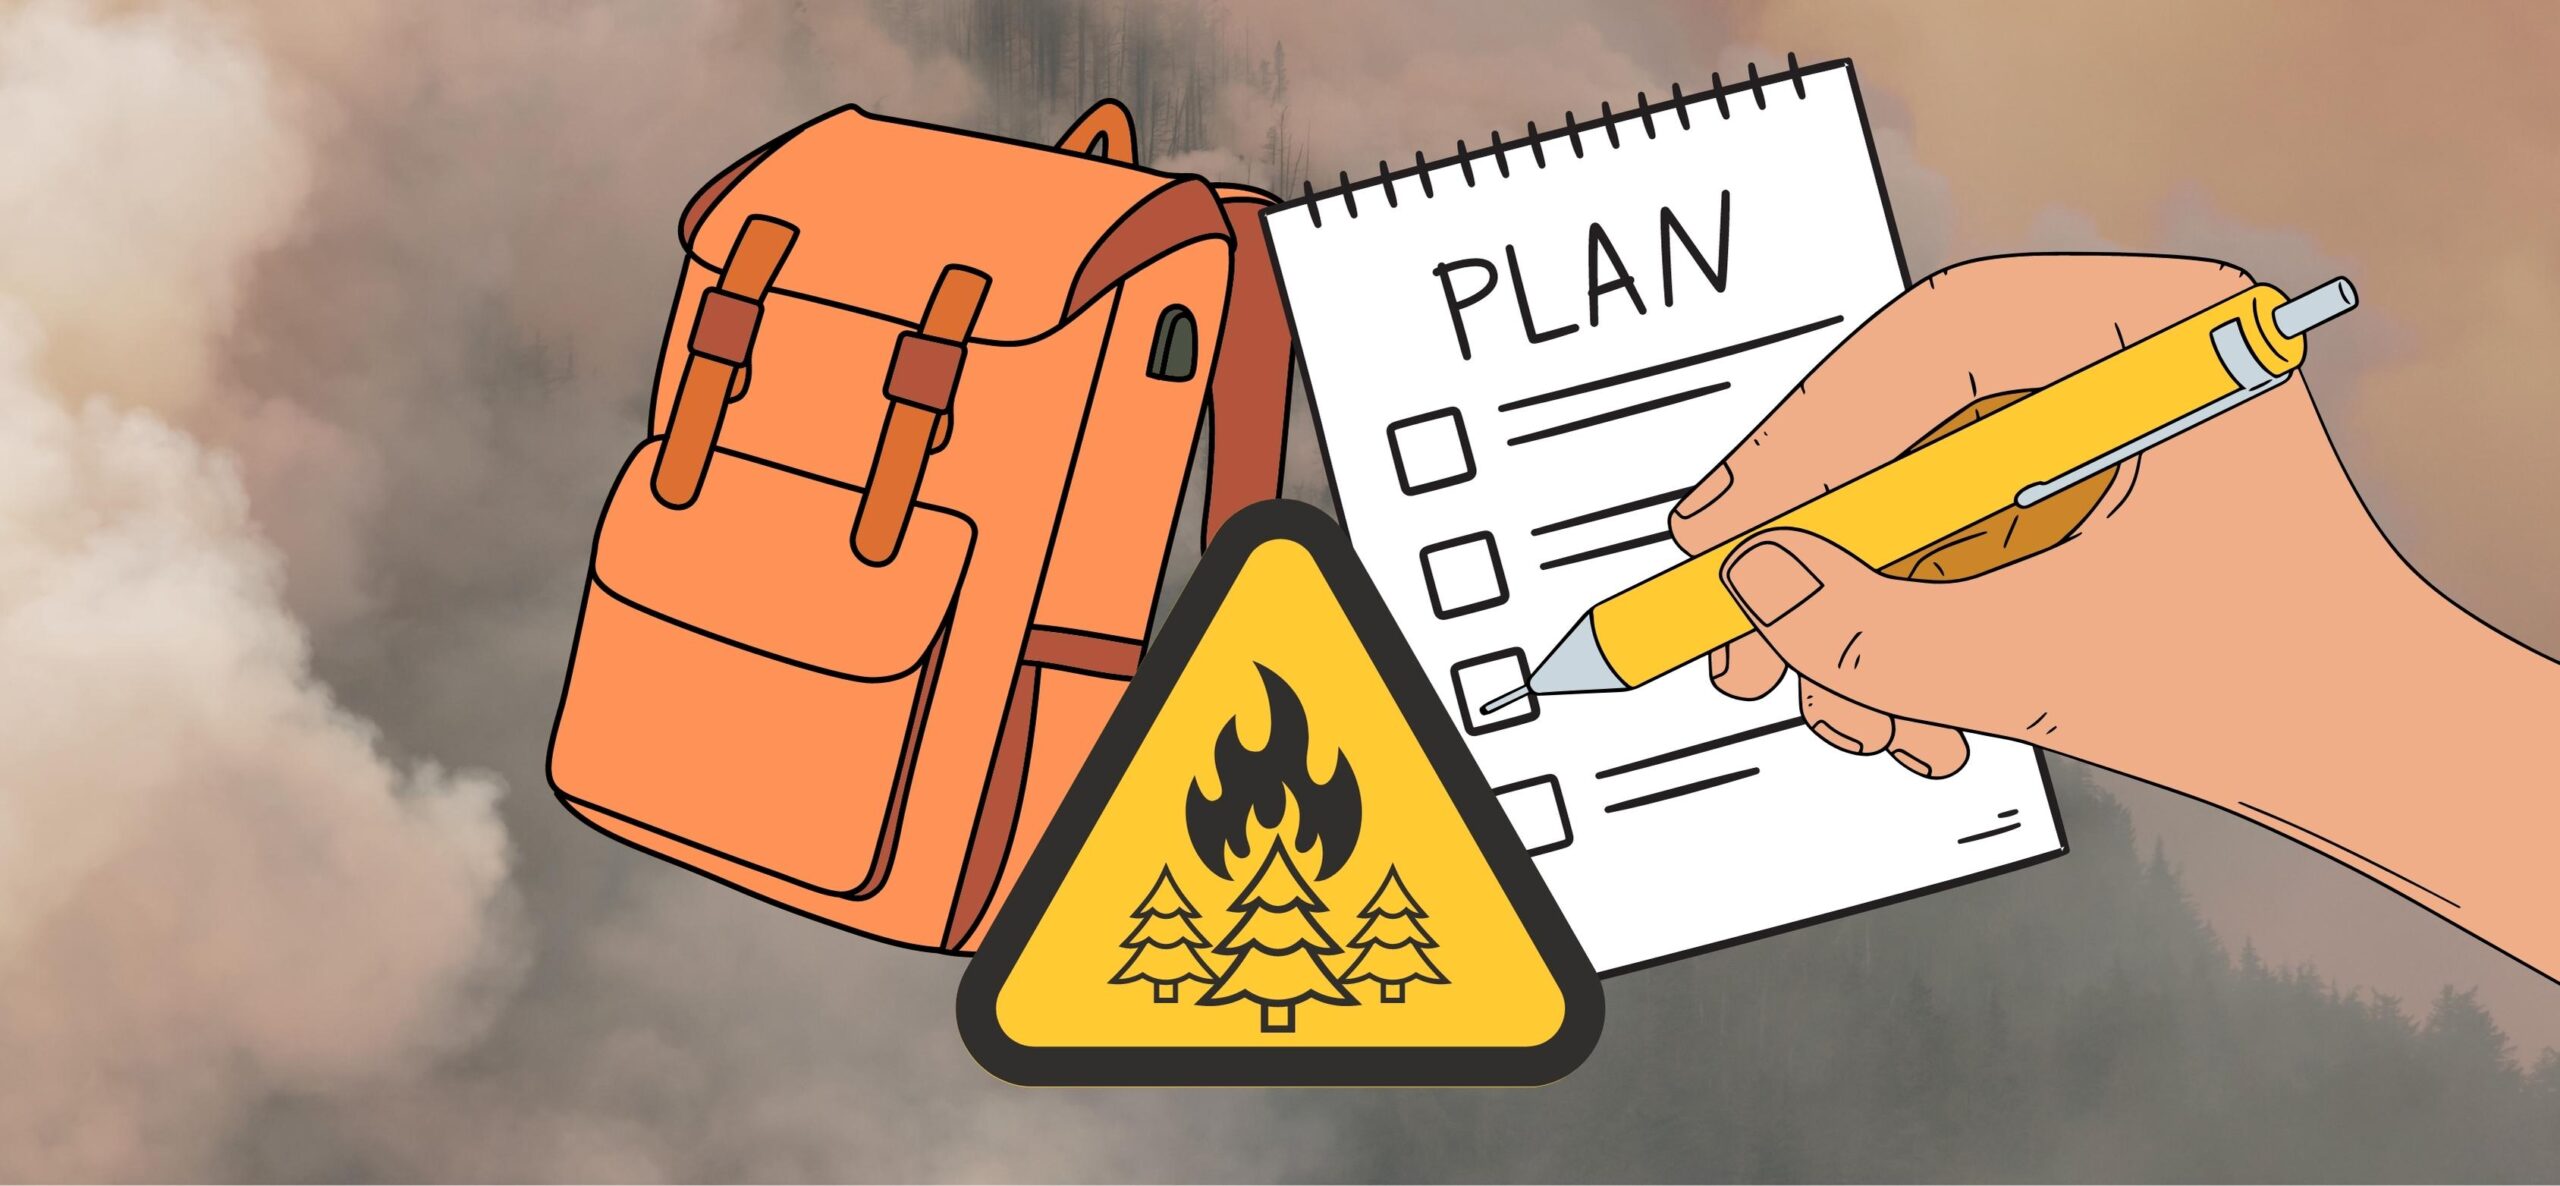 blog header that includes a hand making a list for a plan, an orange backpack, and a warning sign for wildfires